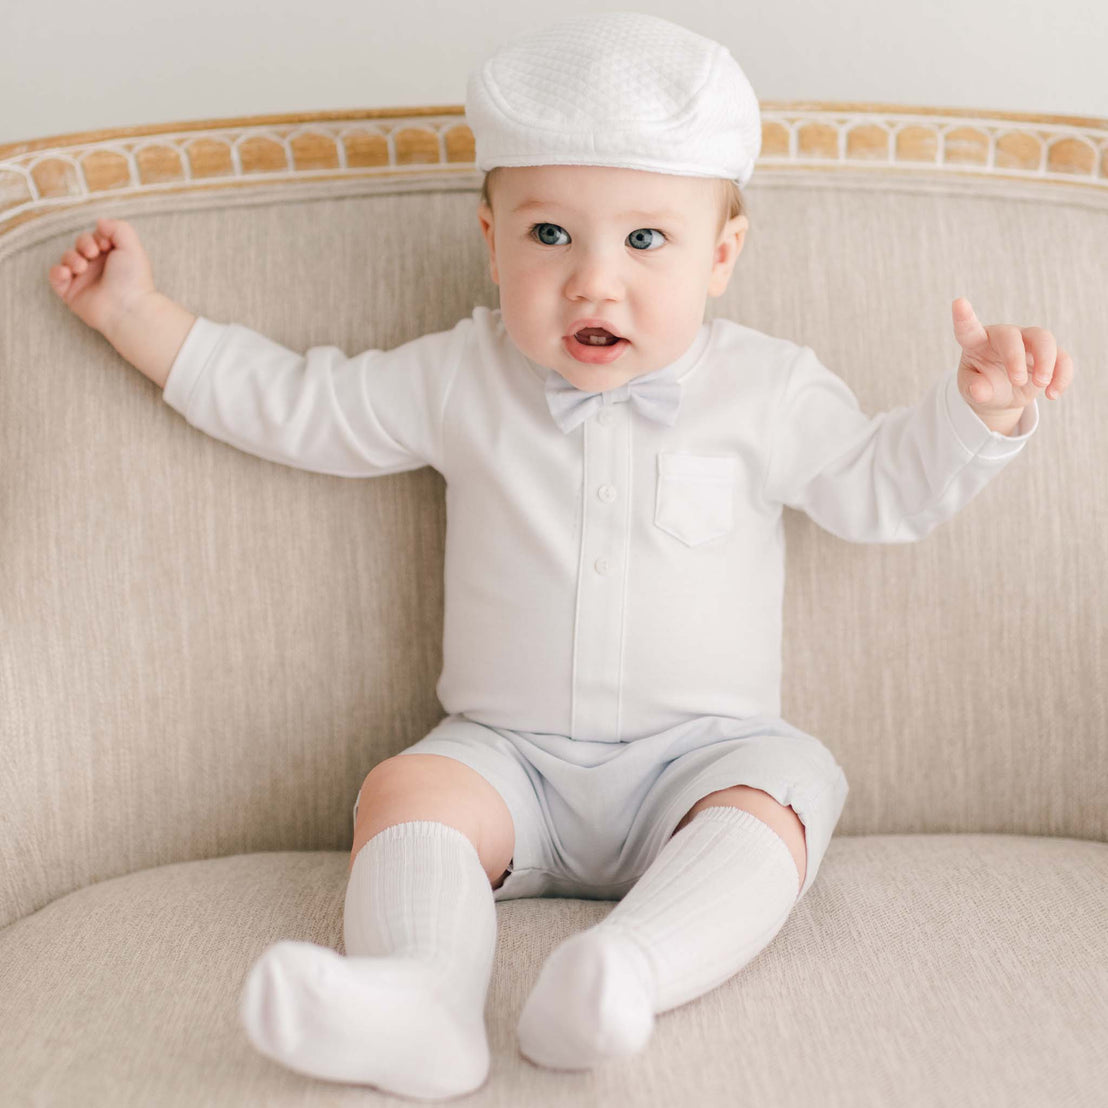 Baby boy sitting on a chair and wearing a white onesie with light blue shorts, a Harrison Quilted Newsboy Cap and blue linen bow tie 